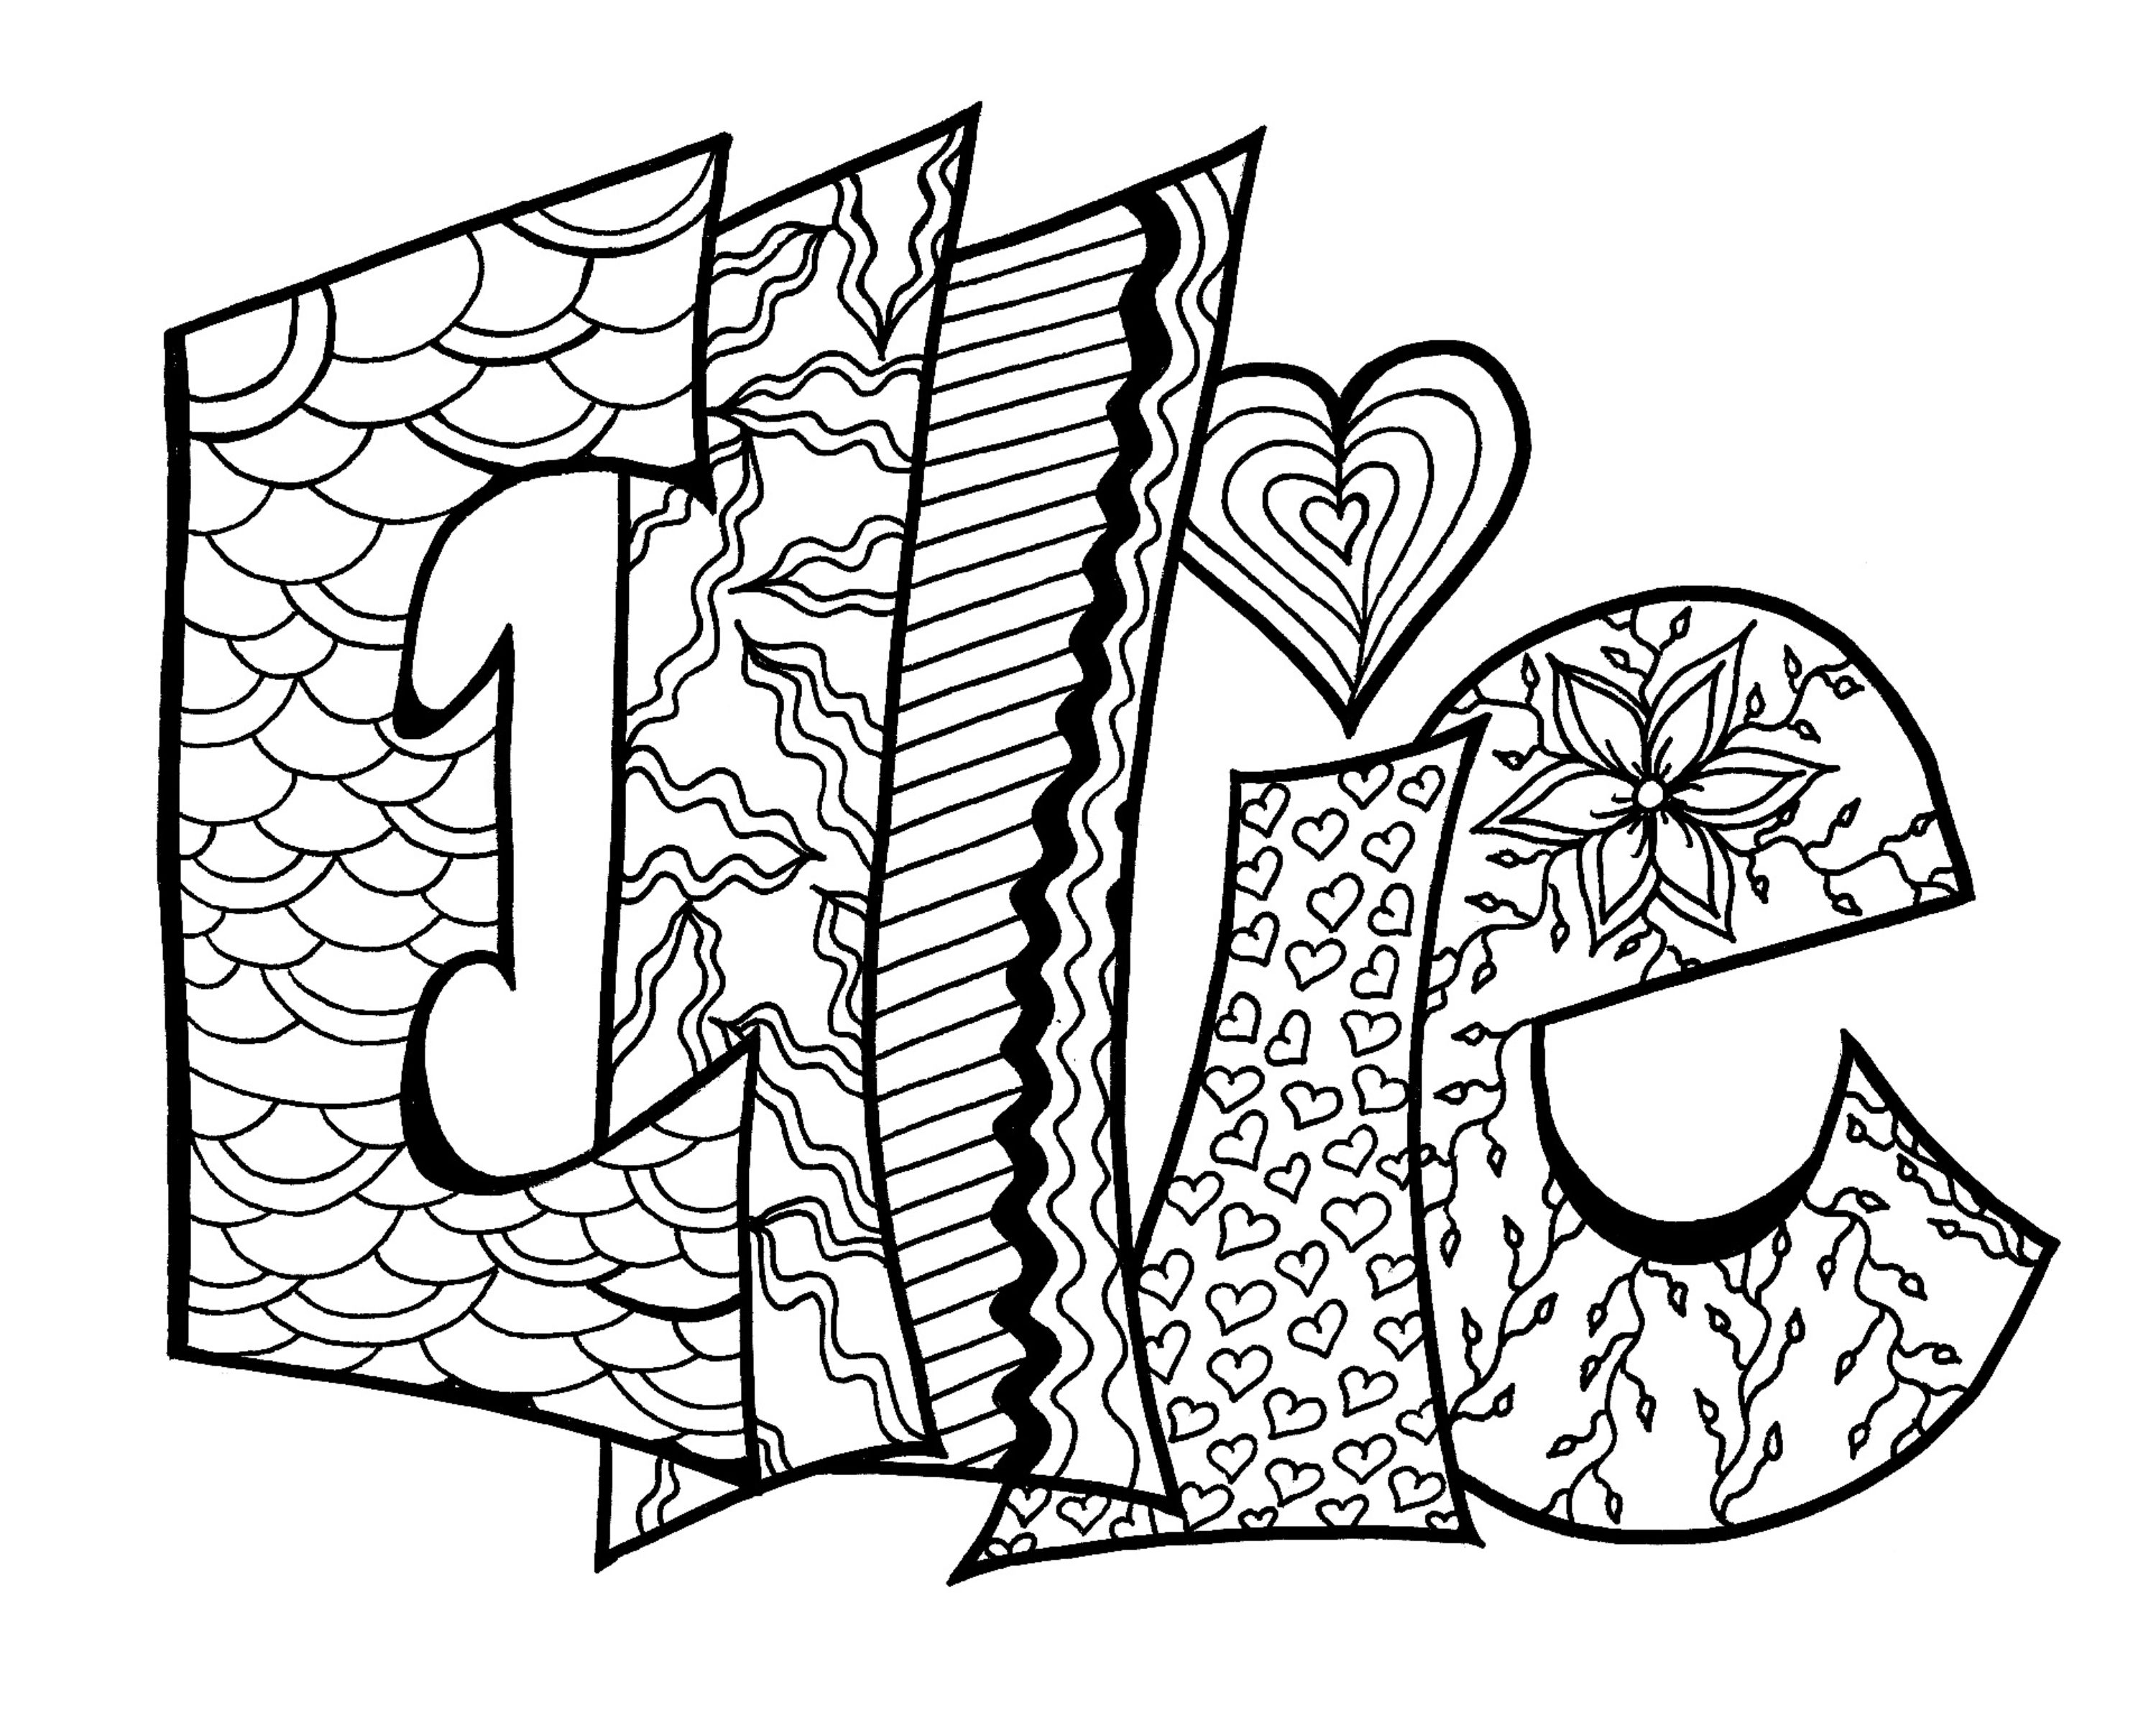 Personalized Name Coloring Pages at GetColorings.com | Free printable colorings pages to print